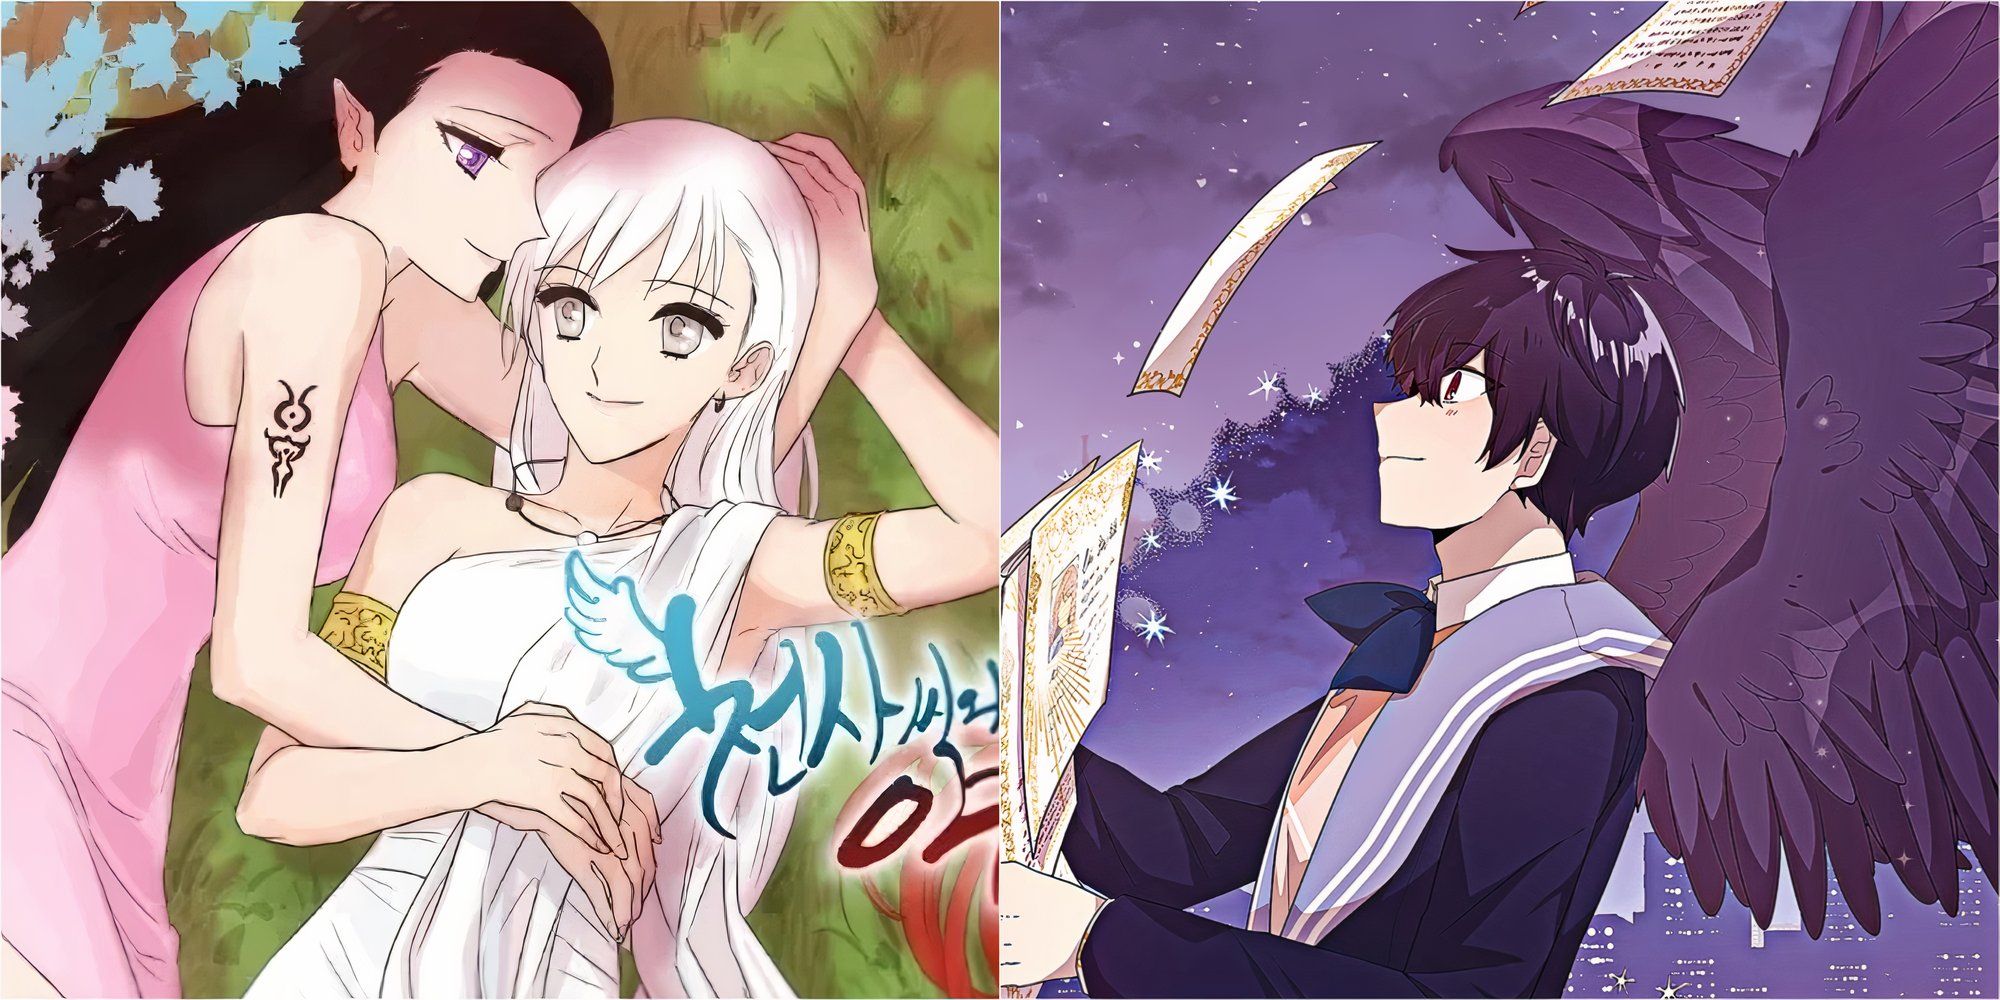 Manhwa With Angel Protagonists